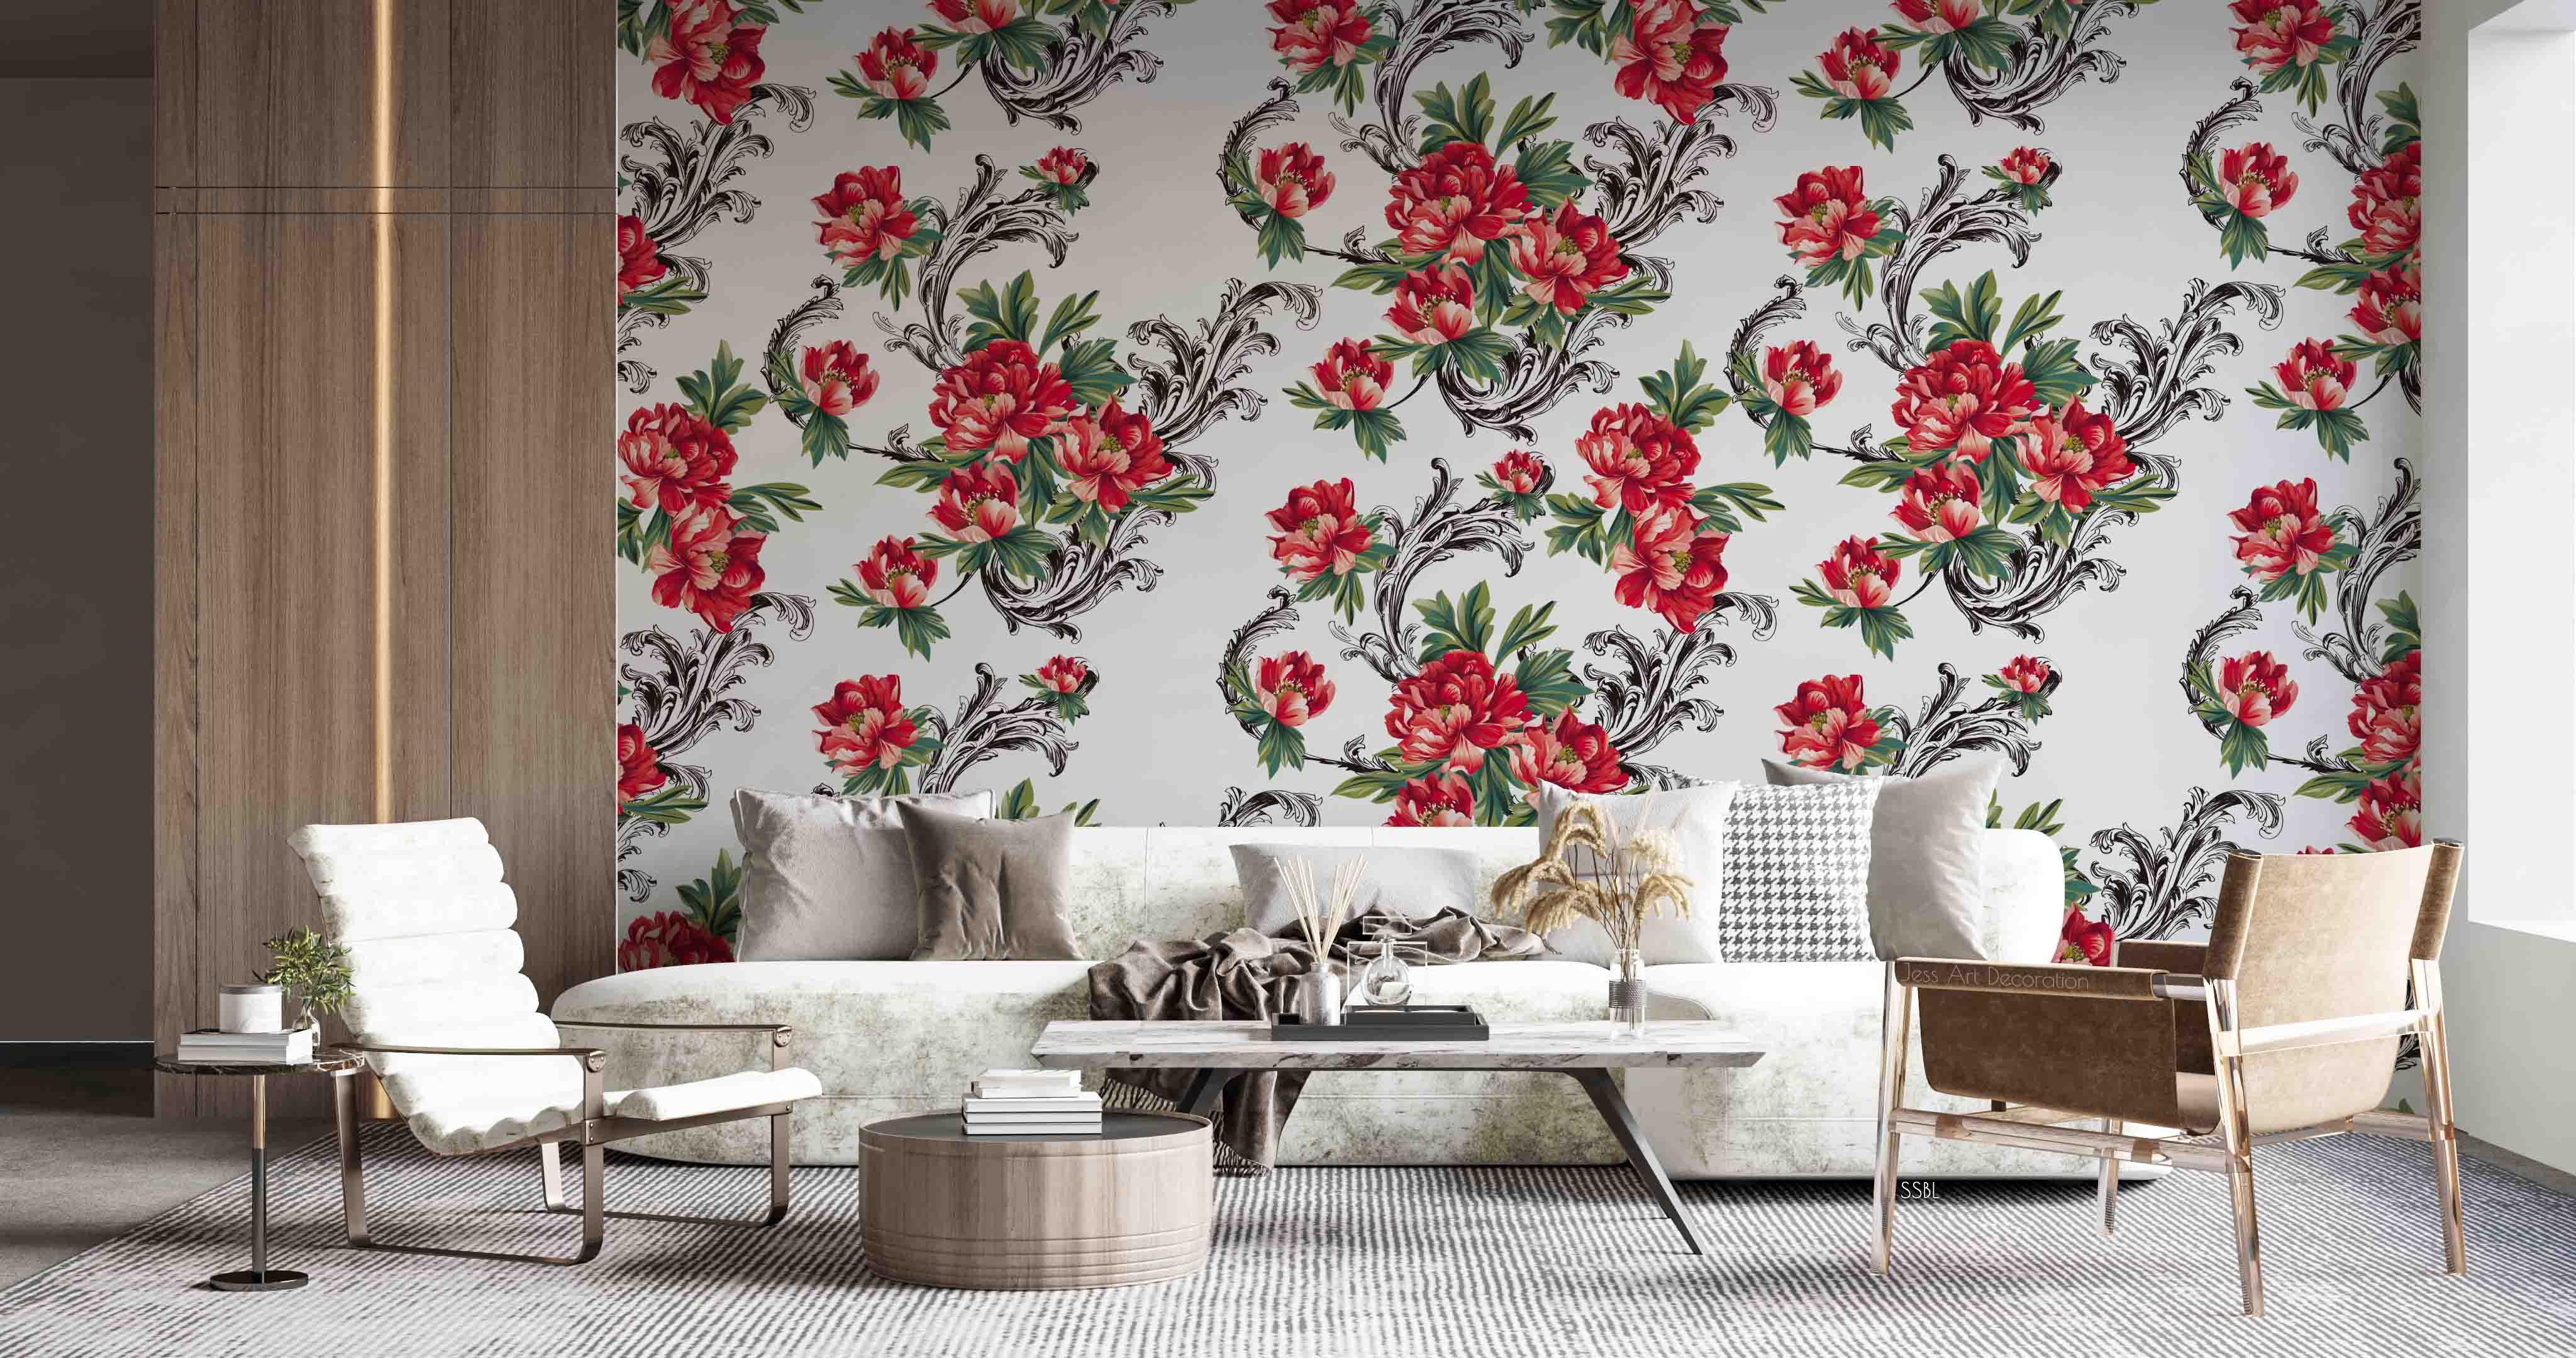 3D Vintage Baroque Art Blooming Peony Flowers Leaves Pattern Wall Mural Wallpaper GD 3632- Jess Art Decoration